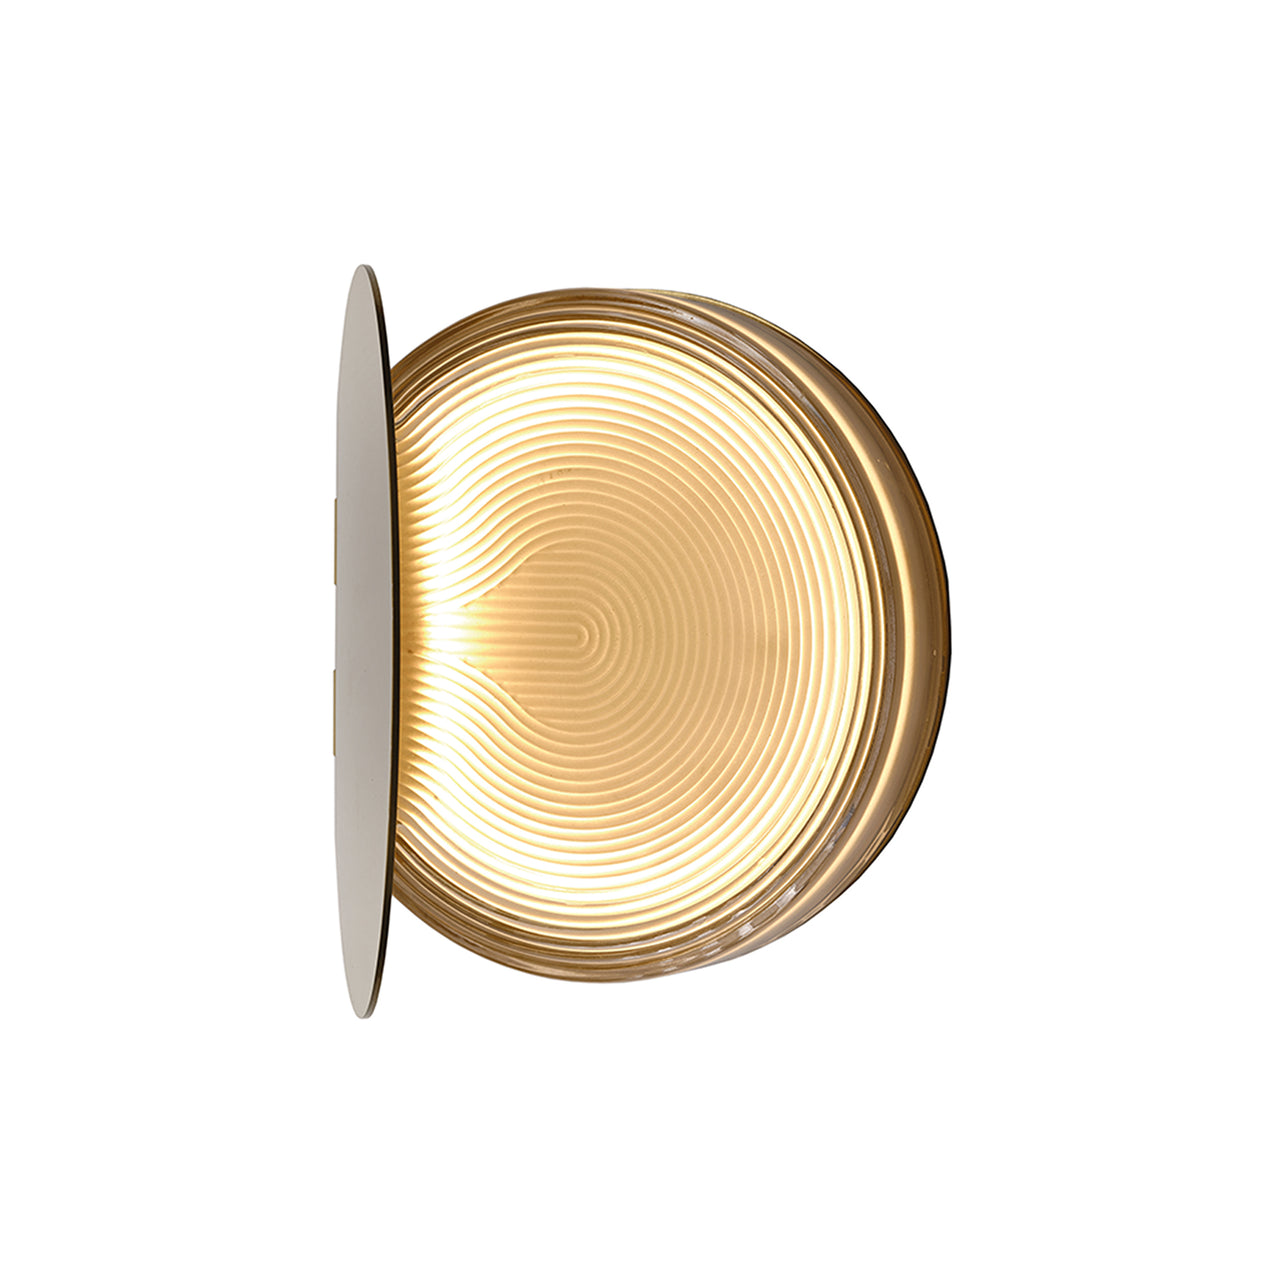 Poudrier Wall Lamp